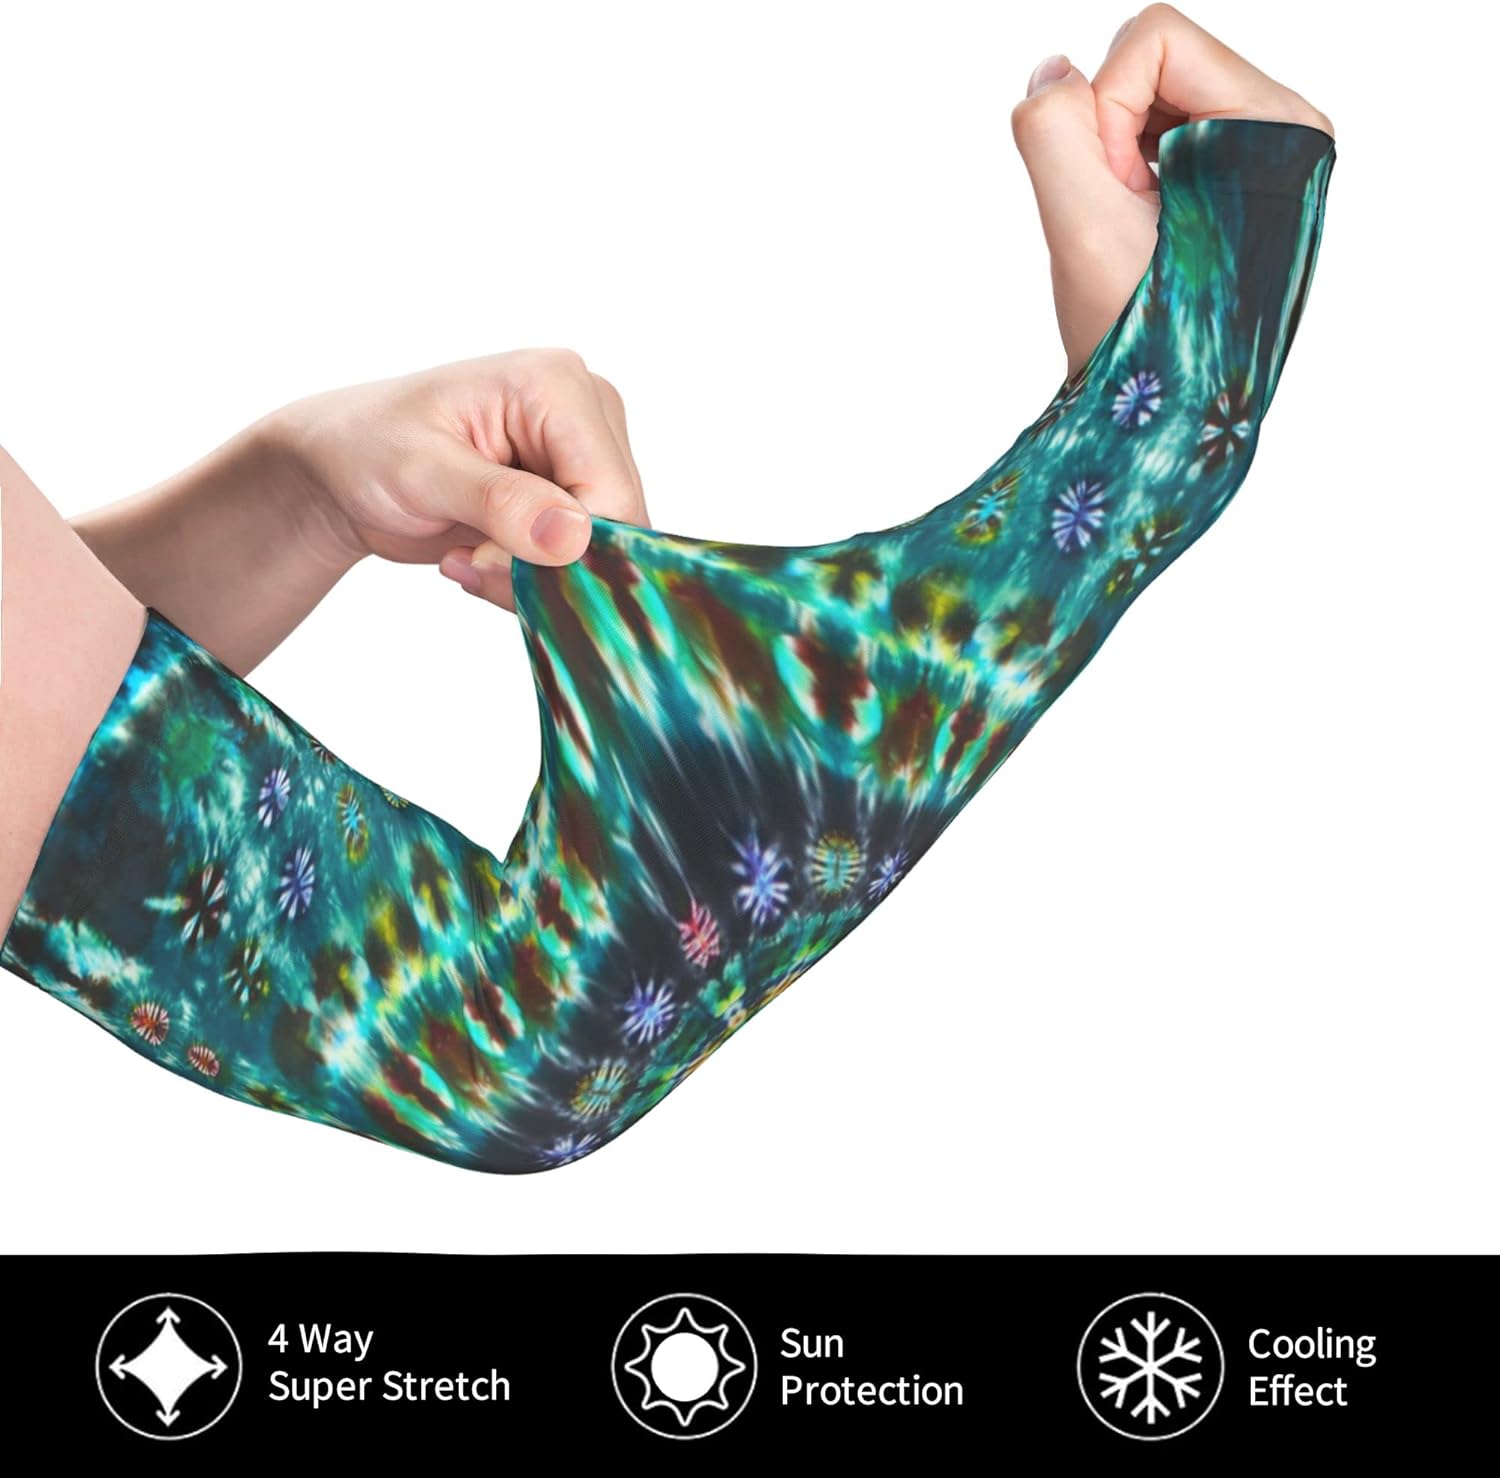 Generic Sports Arm Sleeves Mandalas Tie Dye UV Sun Protection Arm Sleeves with Thumb Holes Cooling Arm - 1 Pair